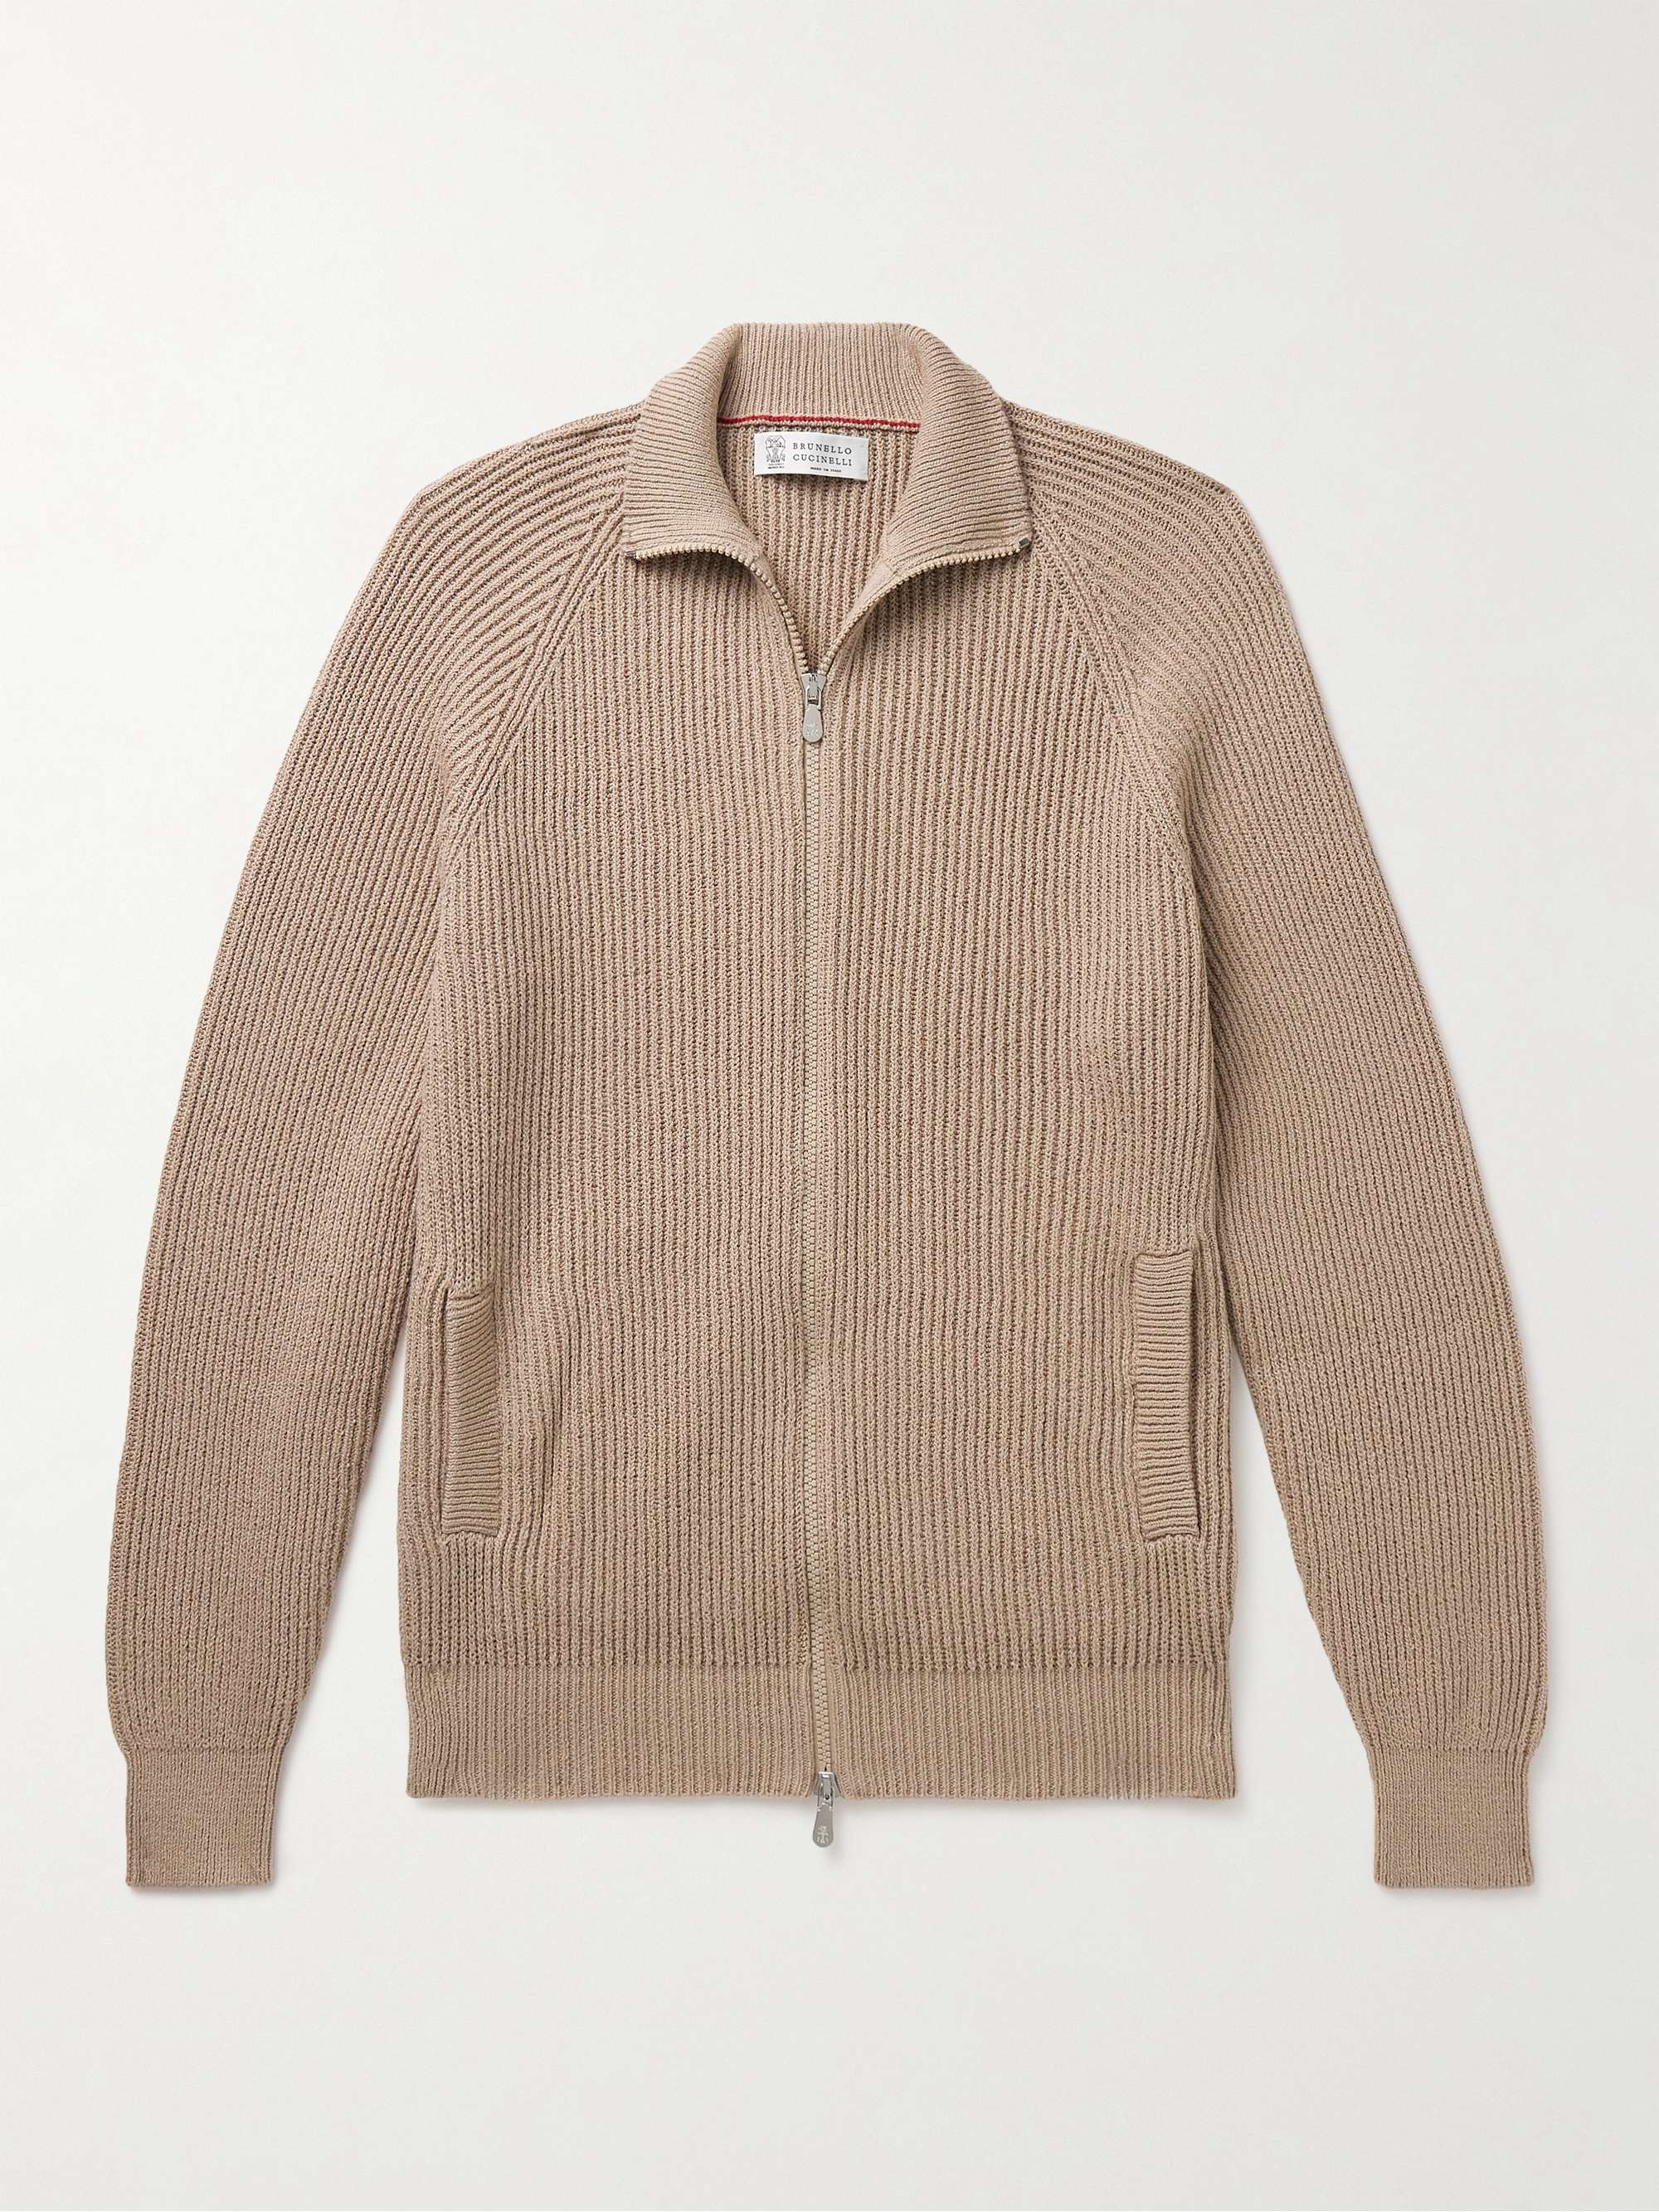 BRUNELLO CUCINELLI Ribbed Cotton Zip-Up Sweater